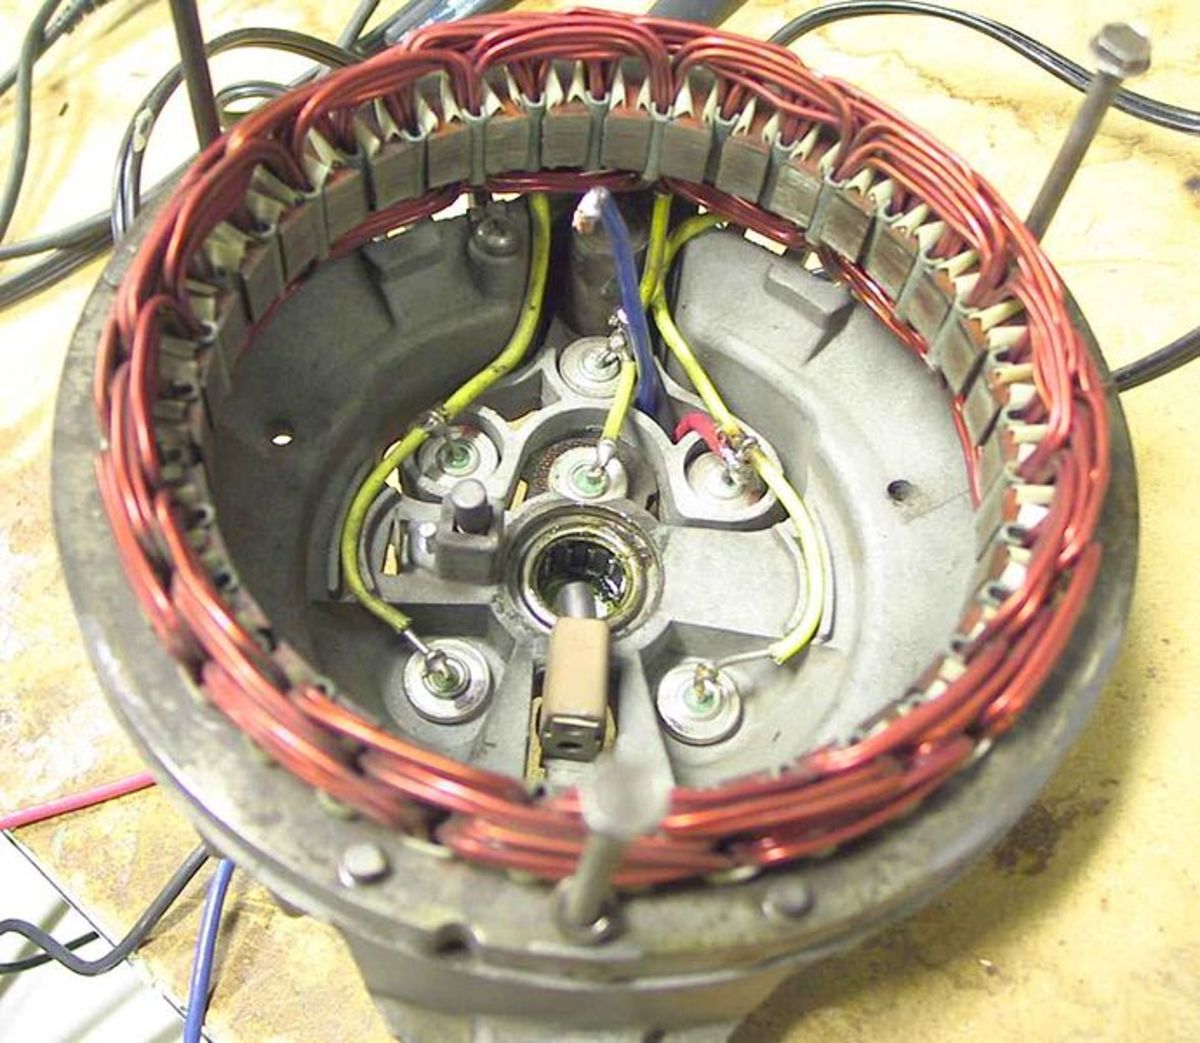 Alternator diodes (connected to the yellow wires) allow current to flow in one direction.